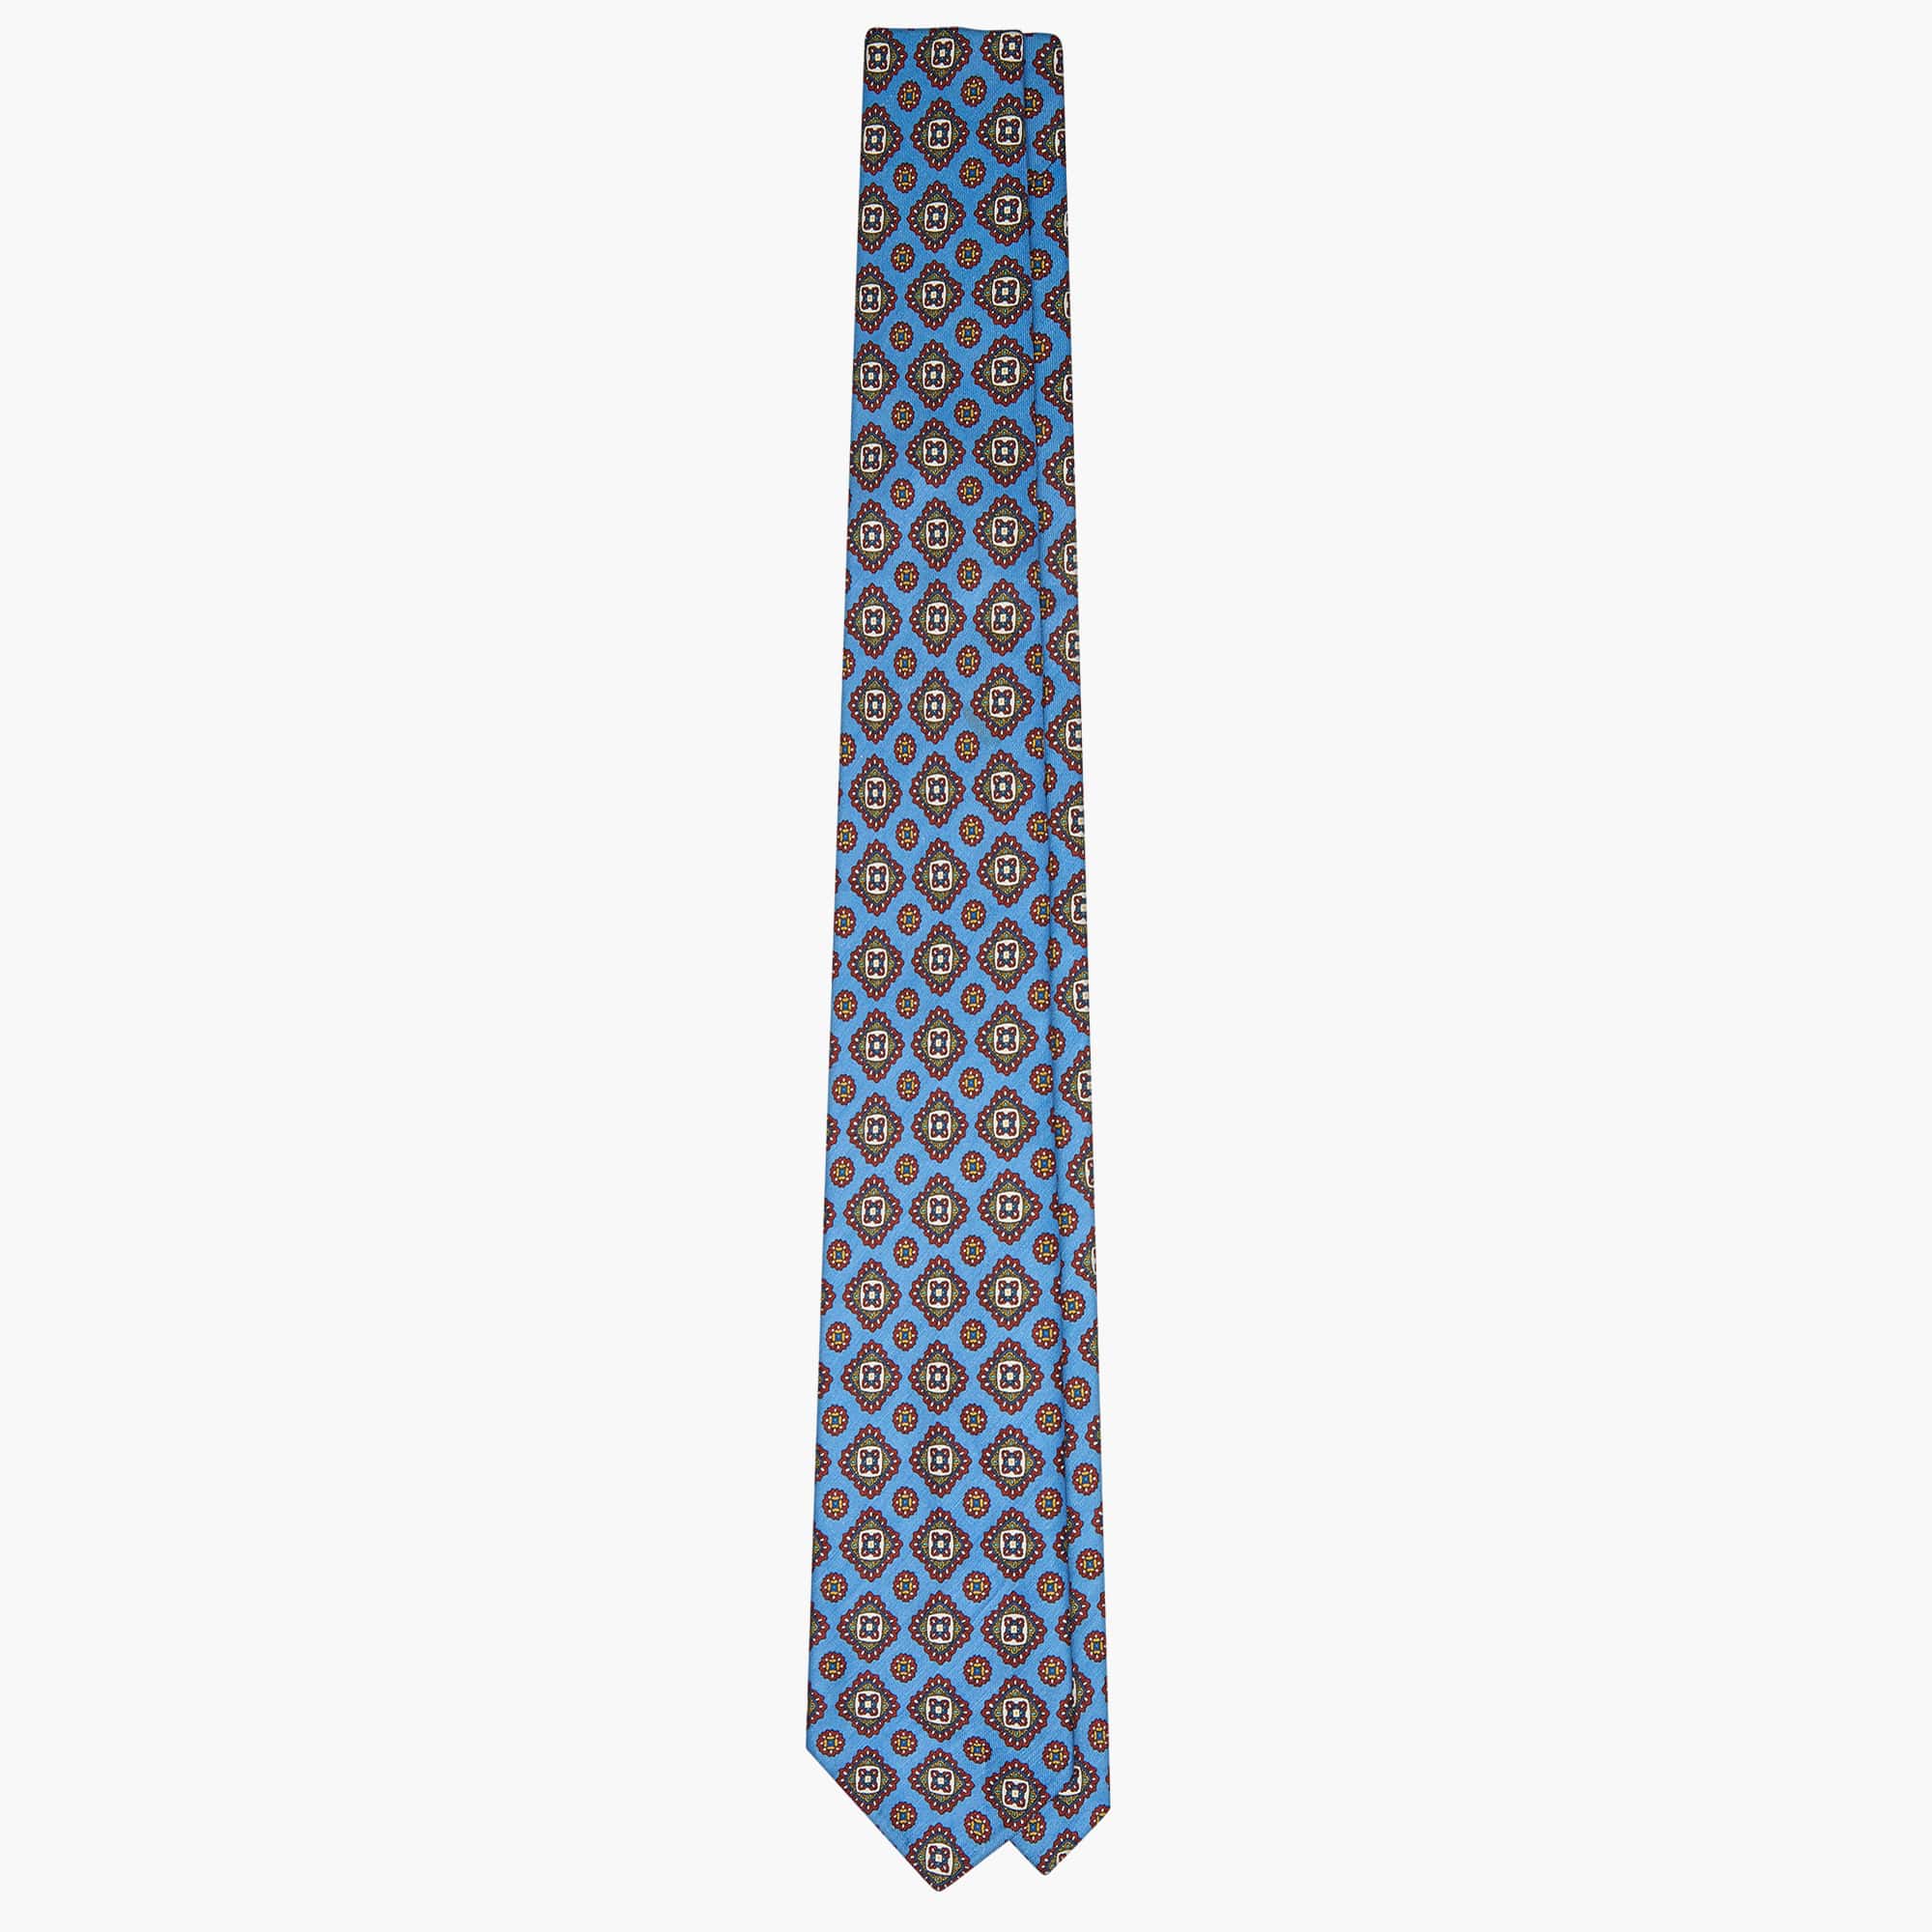 3-Fold Floral Printed Silk And Linen Tie - Blue